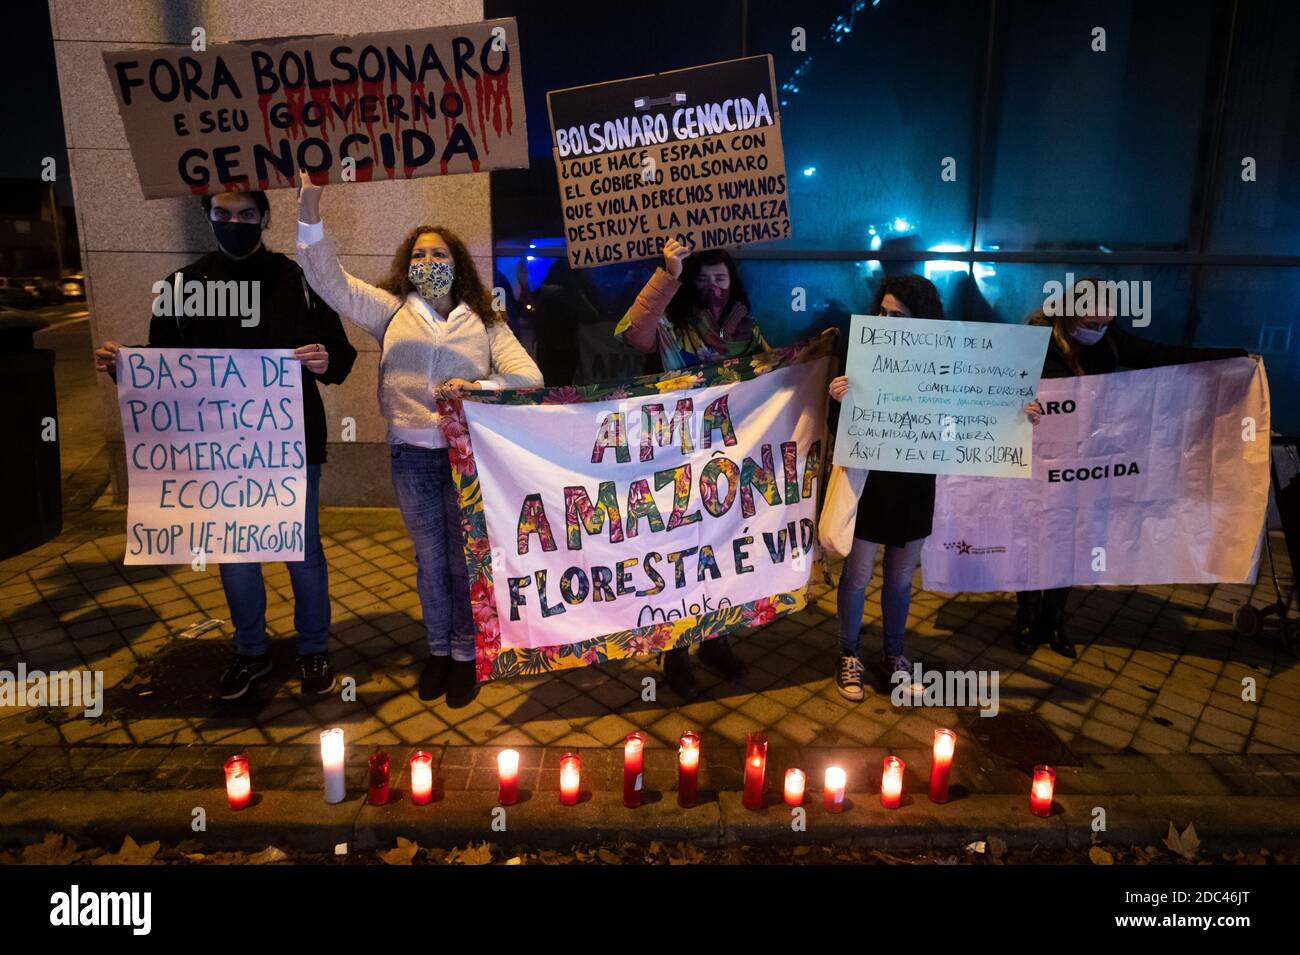 Madrid, Spain. 18th Nov, 2020. People protesting with placards against President of Brazil J. Bolsonaro and EU - Mercosur Trade agreement, calling for a stop to the violation of human rights and the destruction of nature. Credit: Marcos del Mazo/Alamy Live News Stock Photo